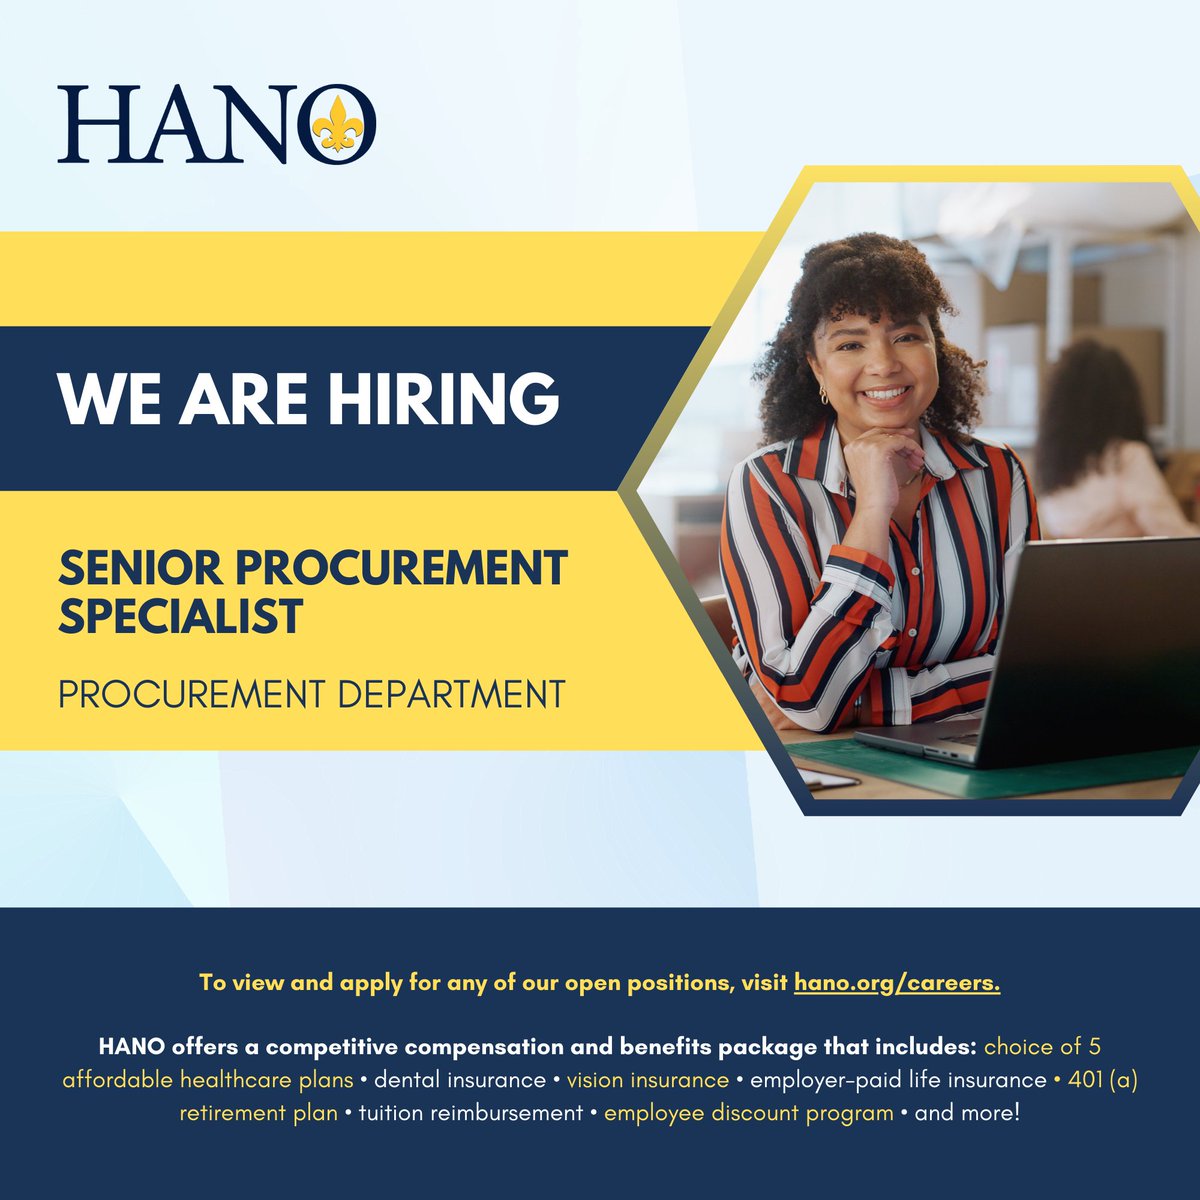 (1/2) Happy #WorkforceWednesday! Join the HANO team as a Senior Procurement Specialist!  Under the guidance of the Procurement Manager, you'll coordinate daily office activities, manage budgets, and implement organizational processes.